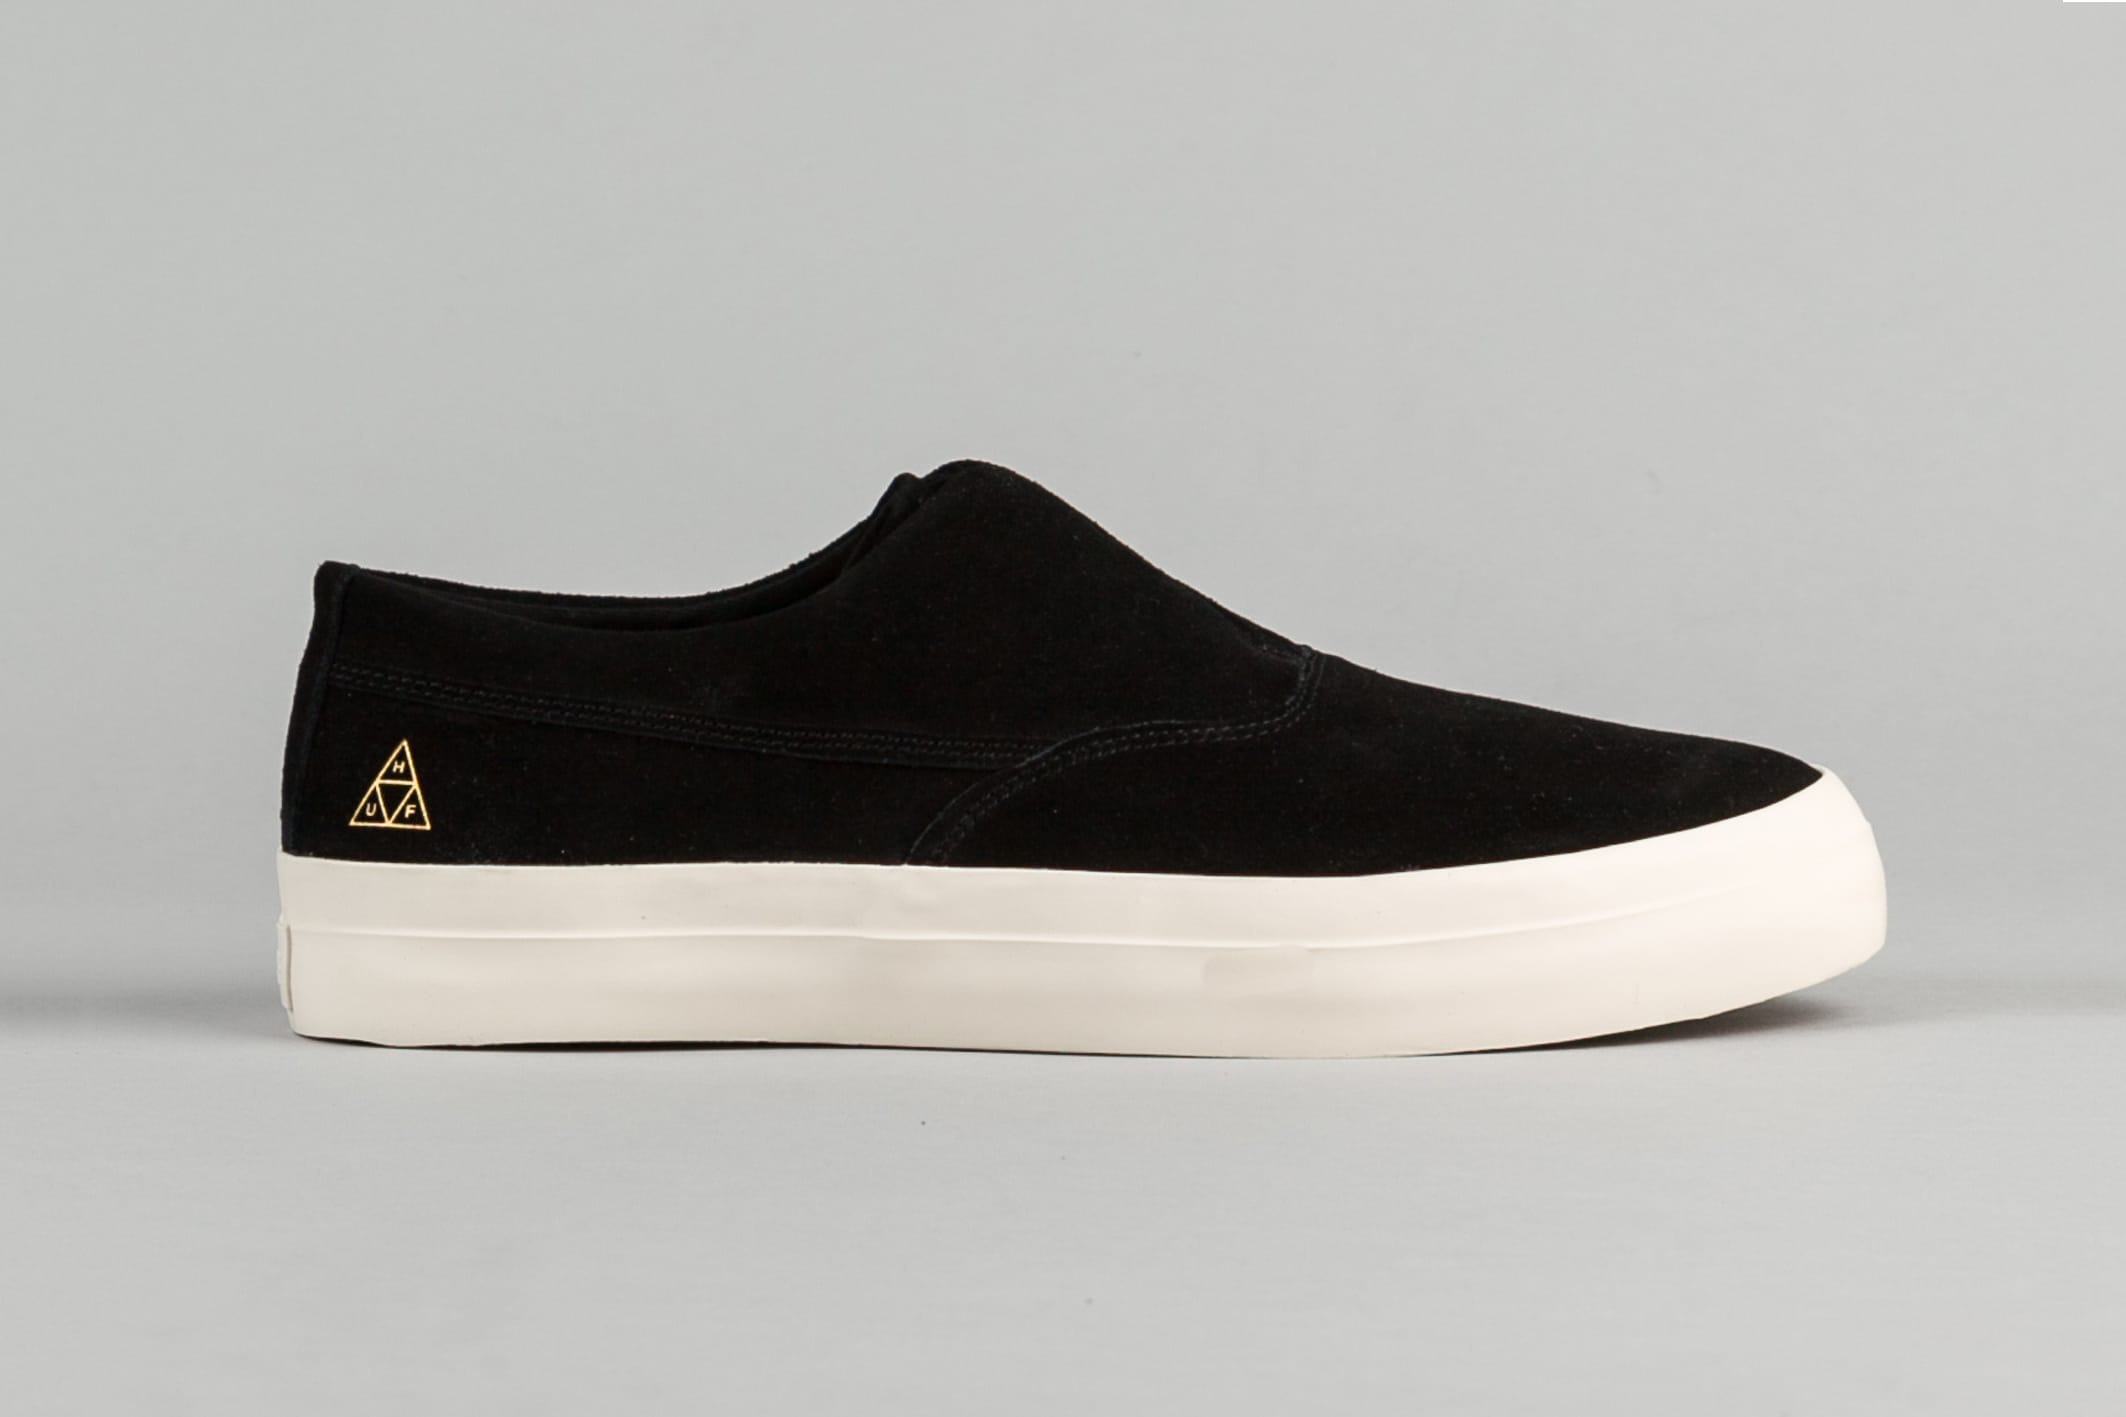 HUF Slip Ons to Benefit Cancer Research 